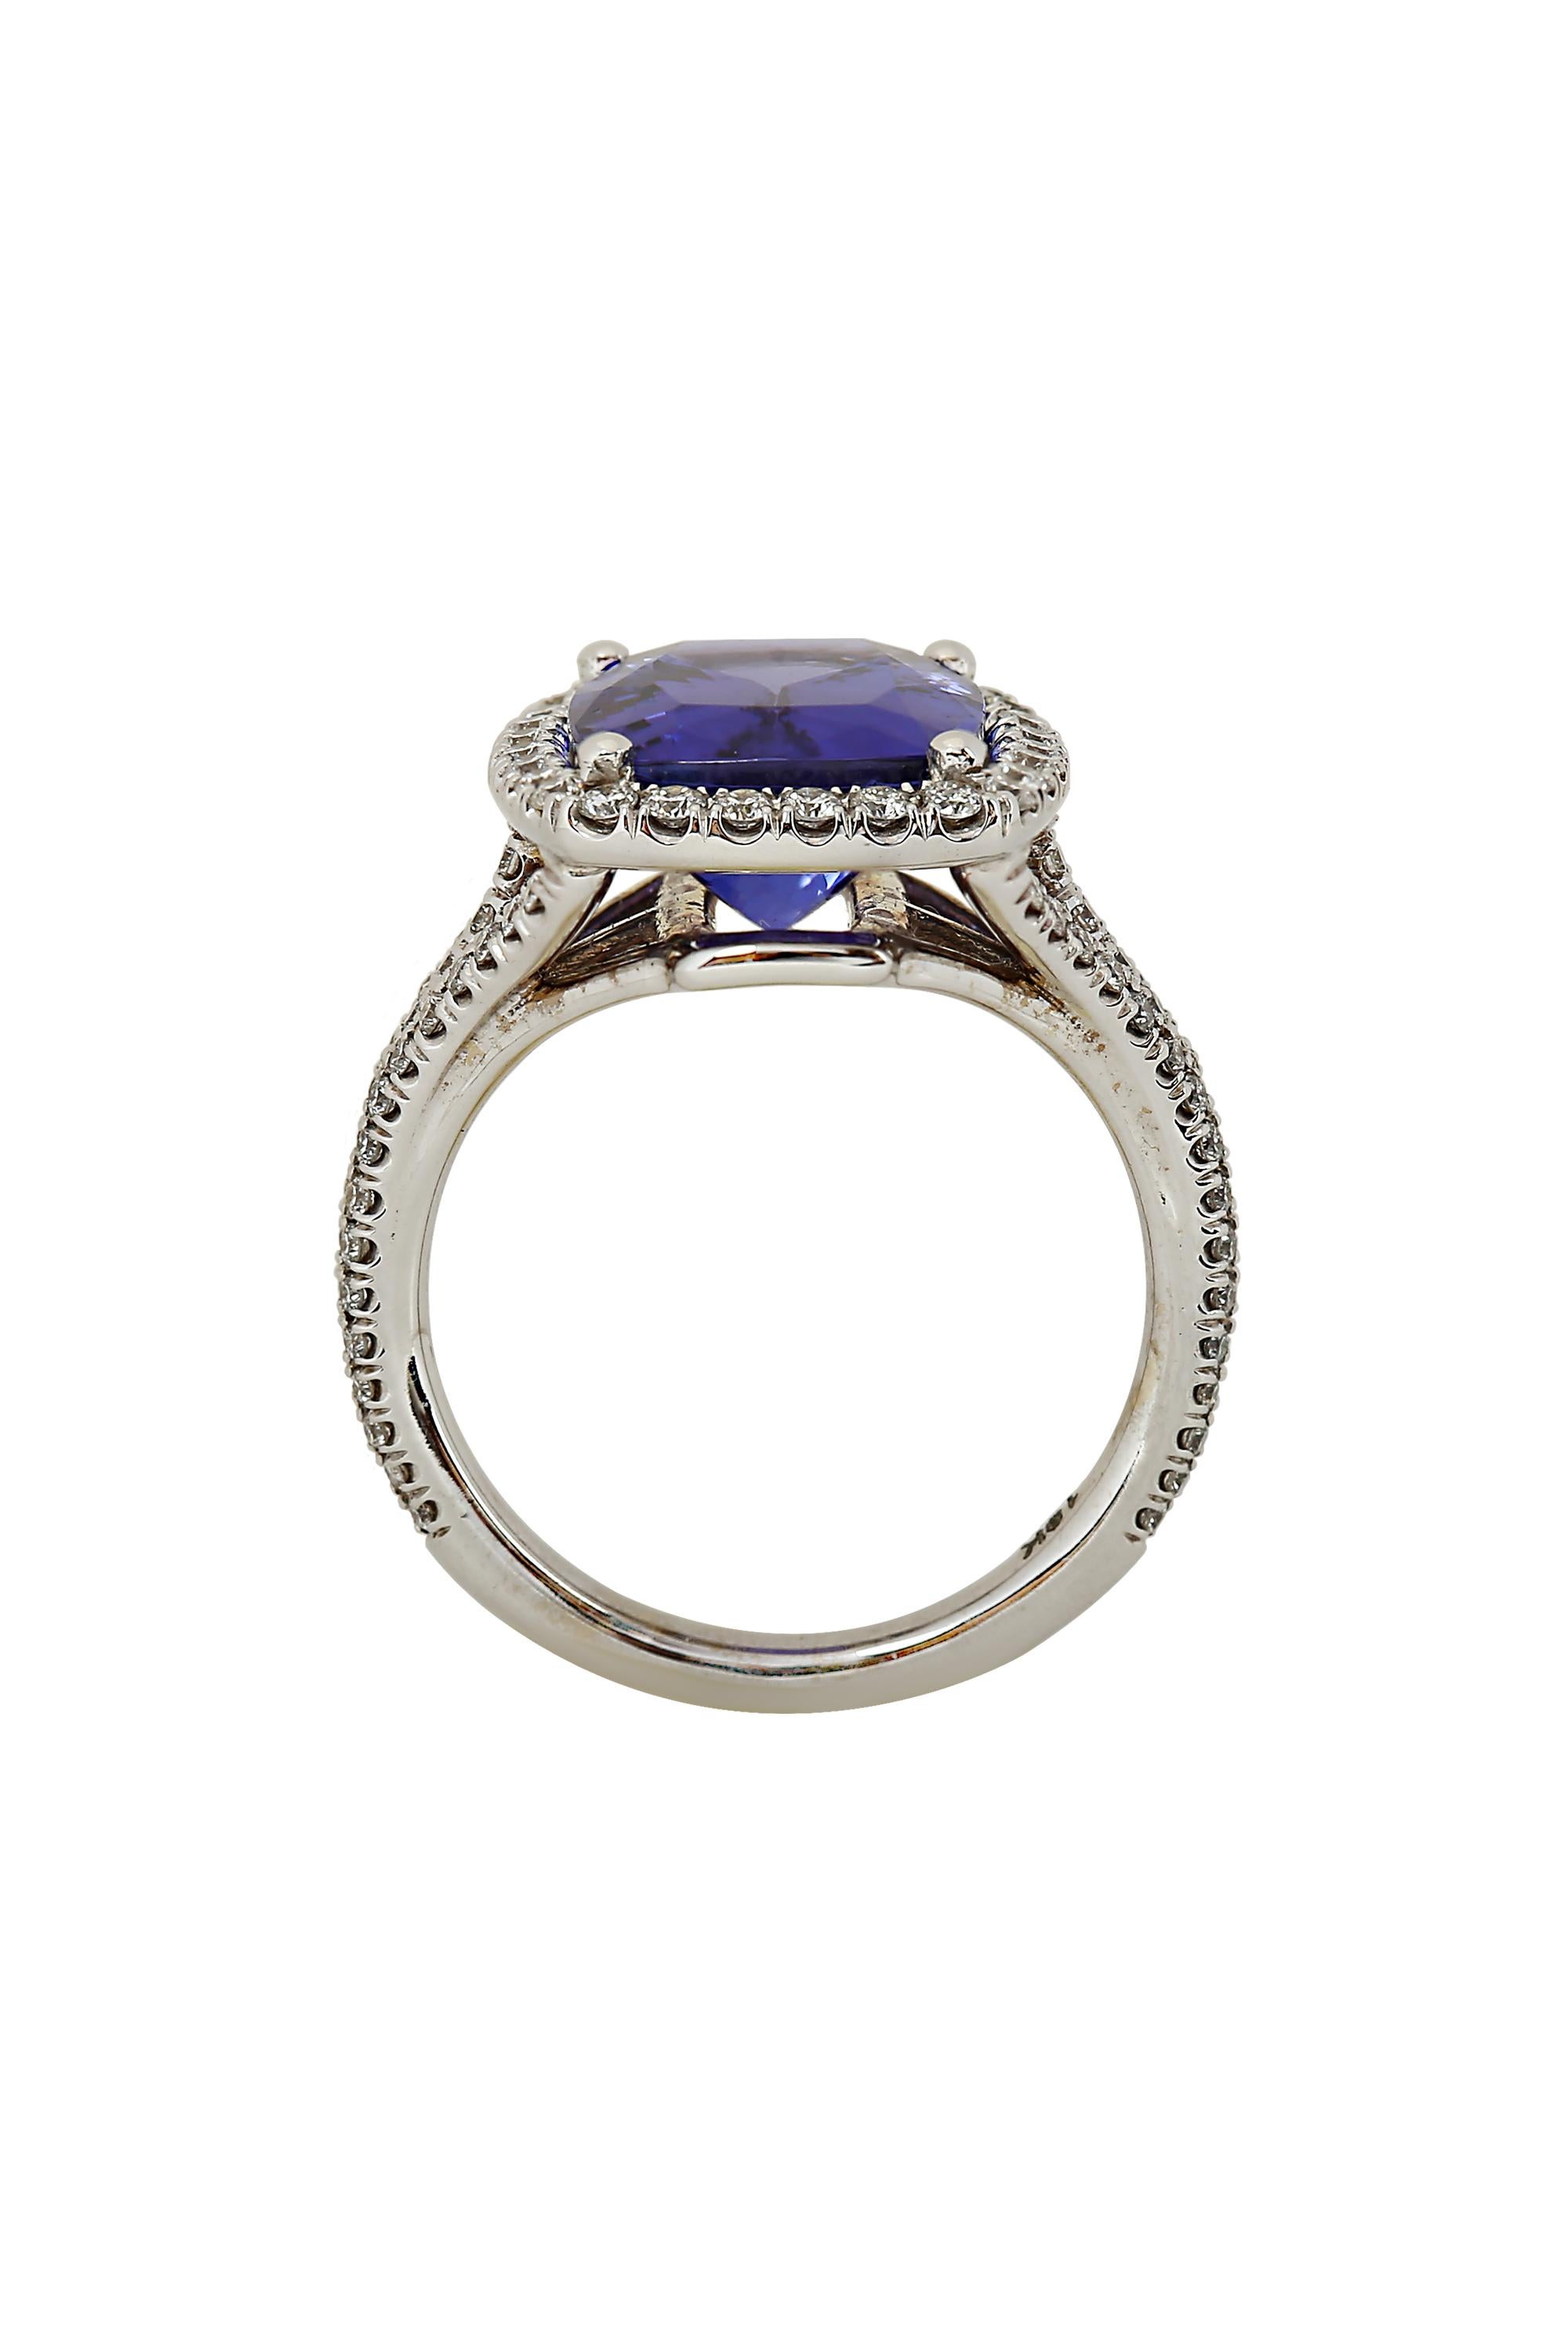 Contemporary Gems Are Forever 5.72 Carat Tanzanite Diamond 18 Karat White Gold Ring For Sale